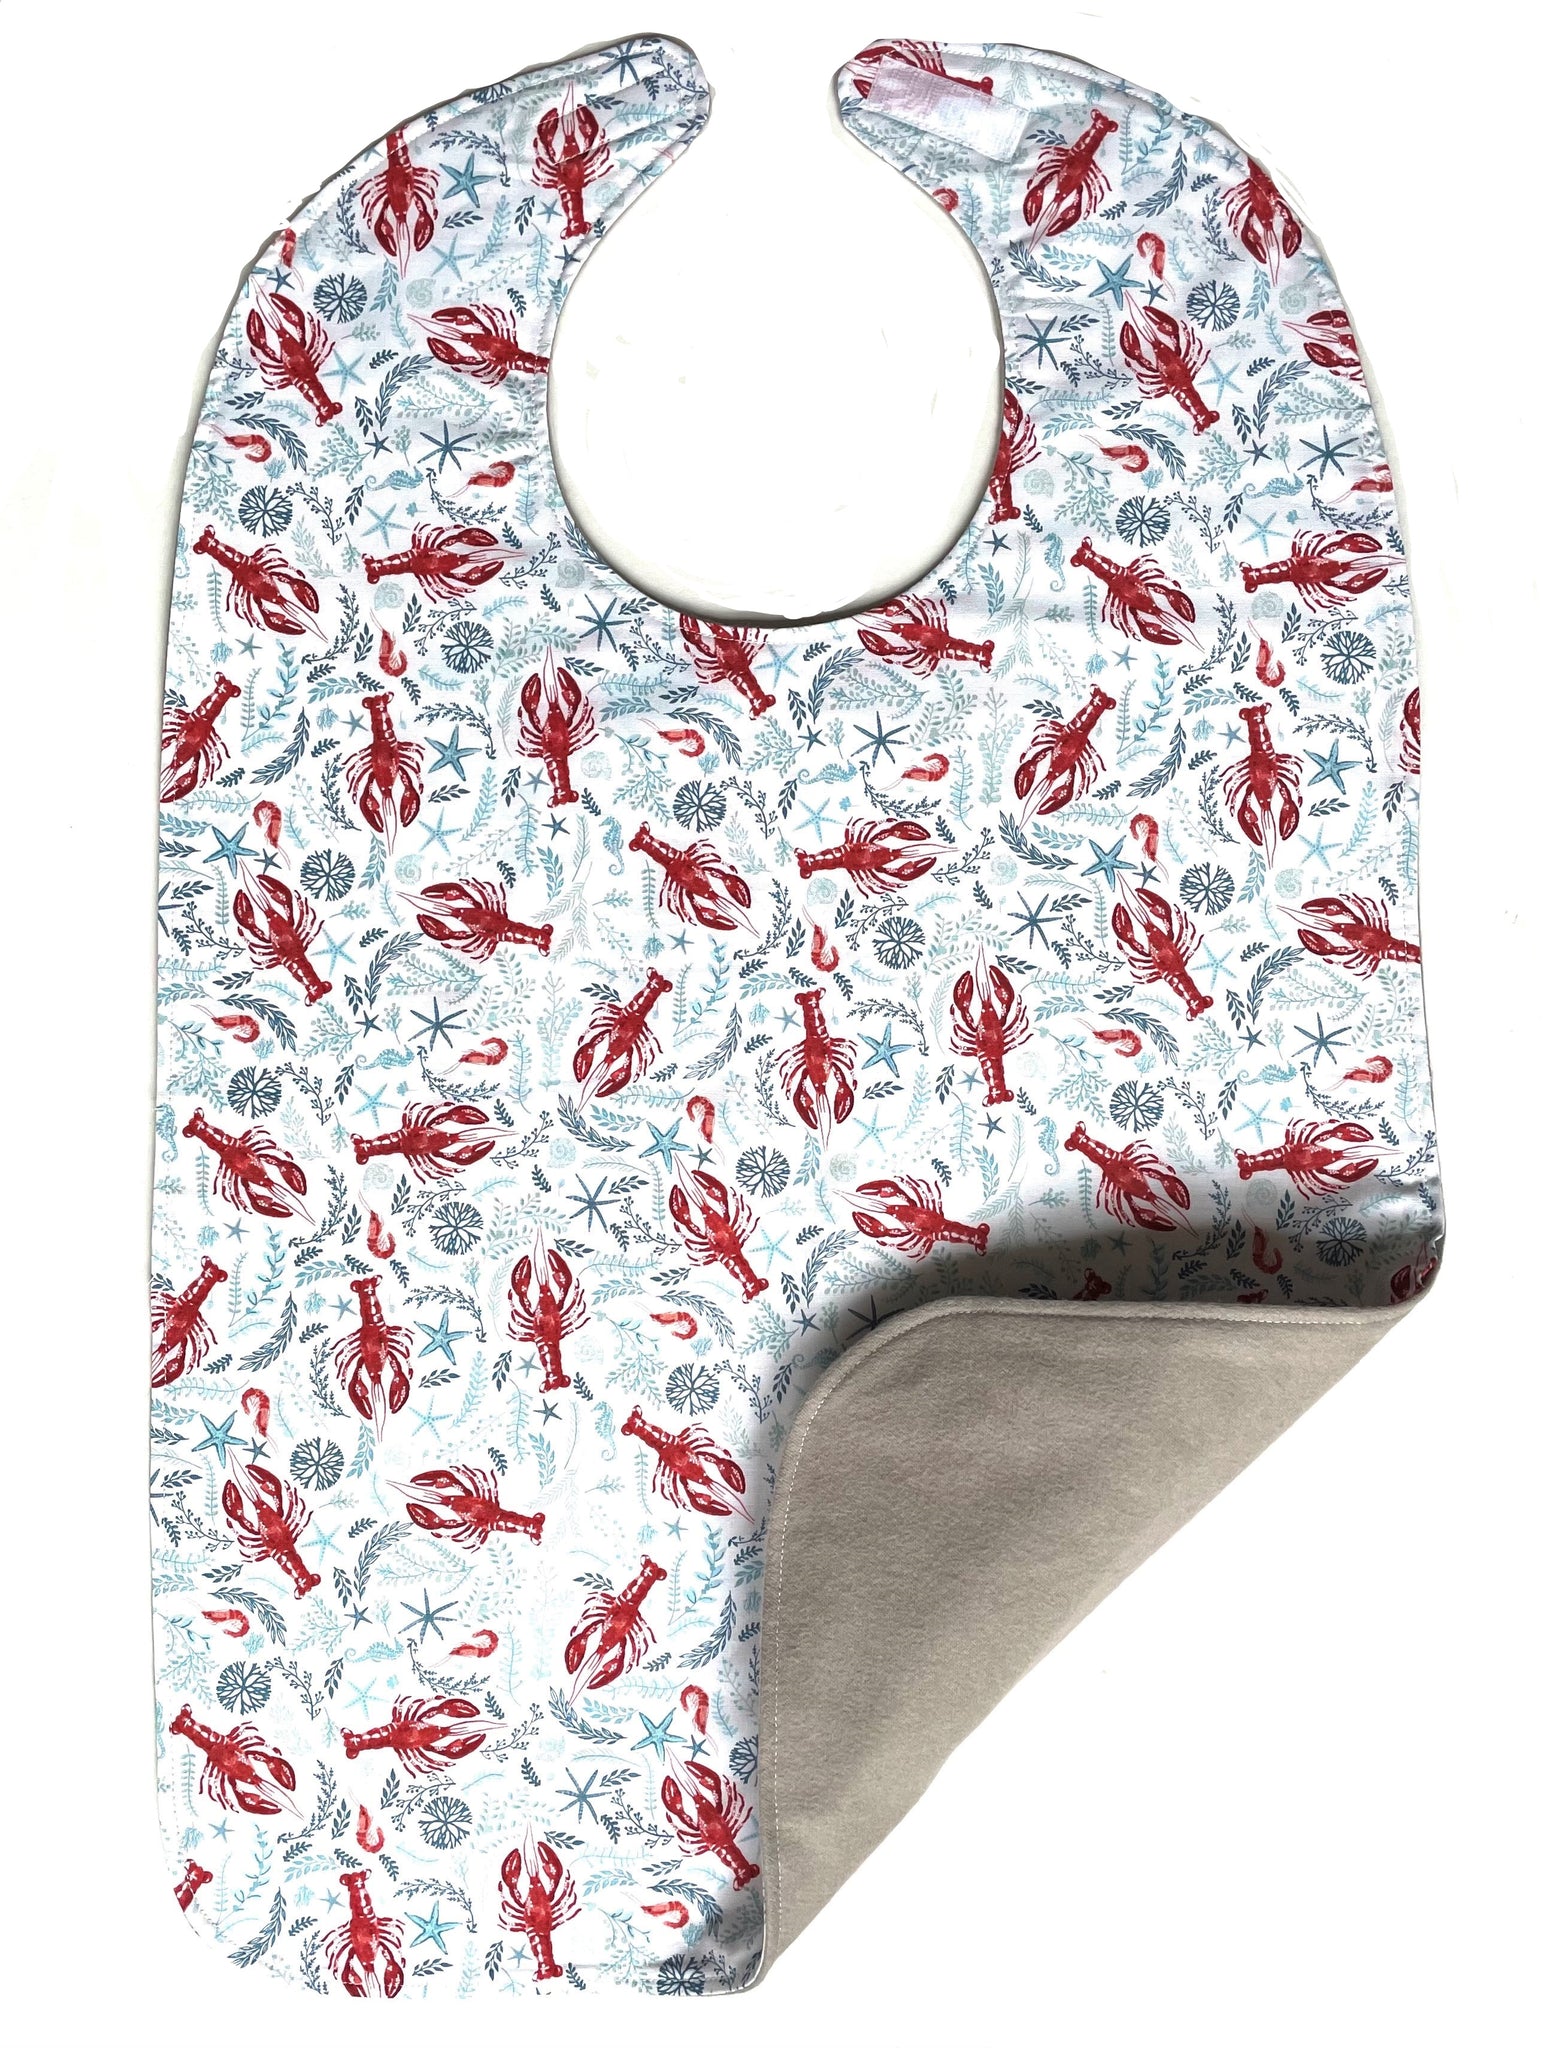 The perfect lobster bib with three layers of 100% premium cotton and expertly designed for comfort and quality.